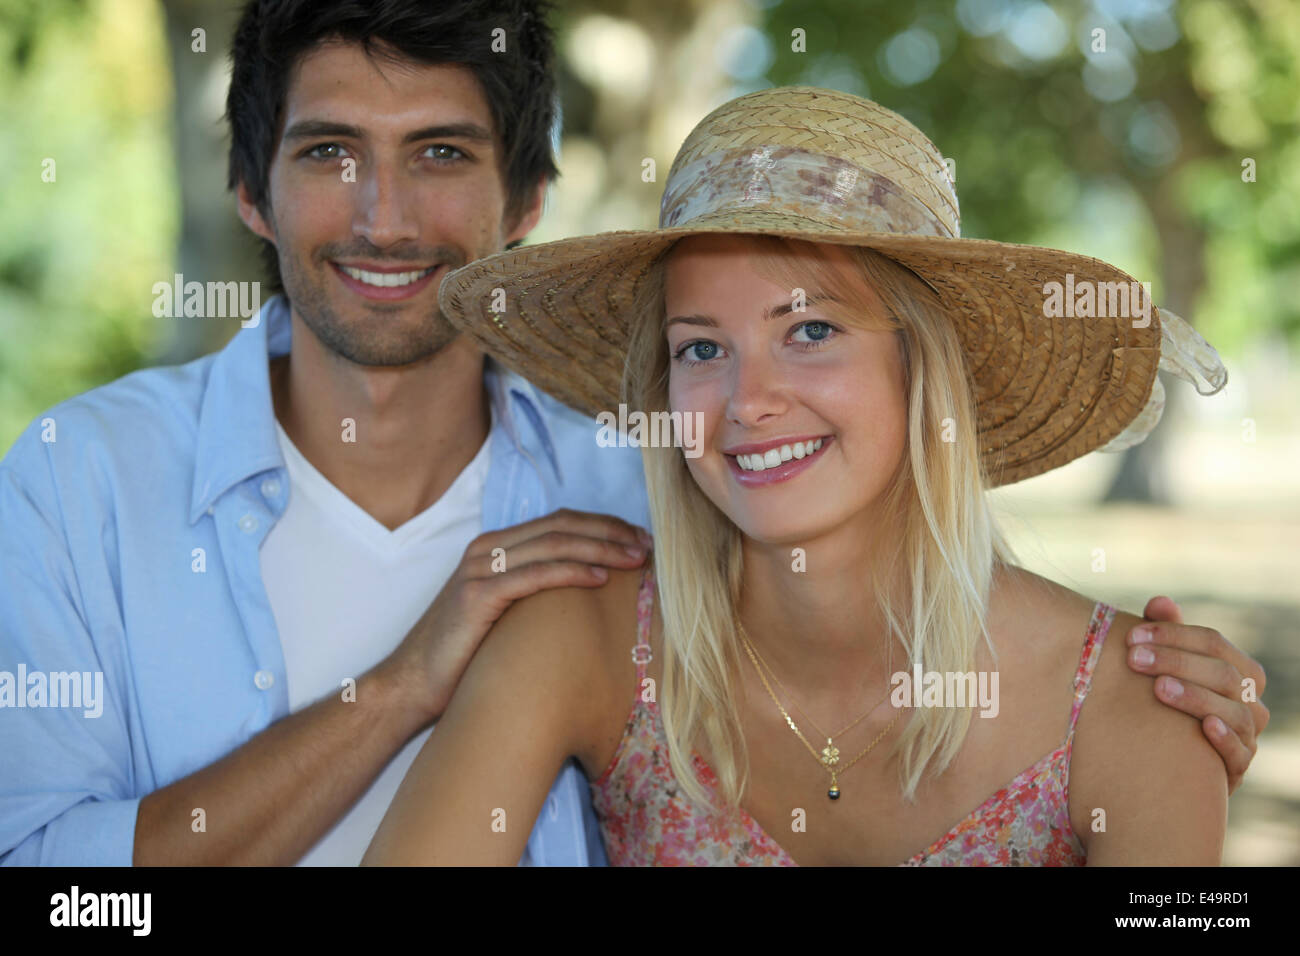 Young summery couple Stock Photo